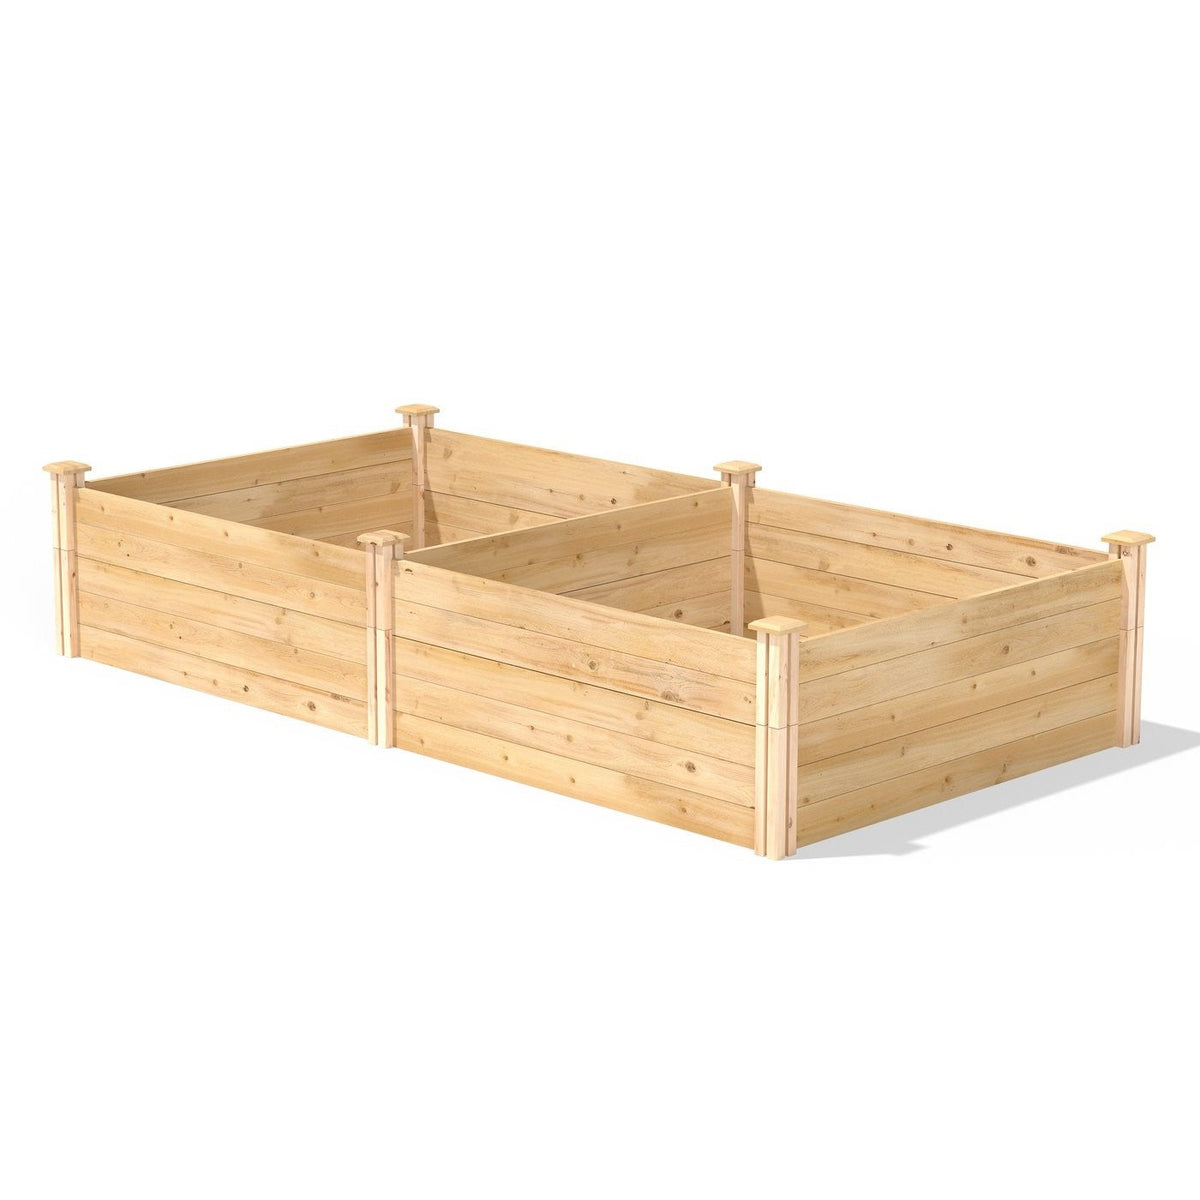 17-inch High Cedar Wood Raised Garden Bed 4 ft x 8 ft - Made in USA